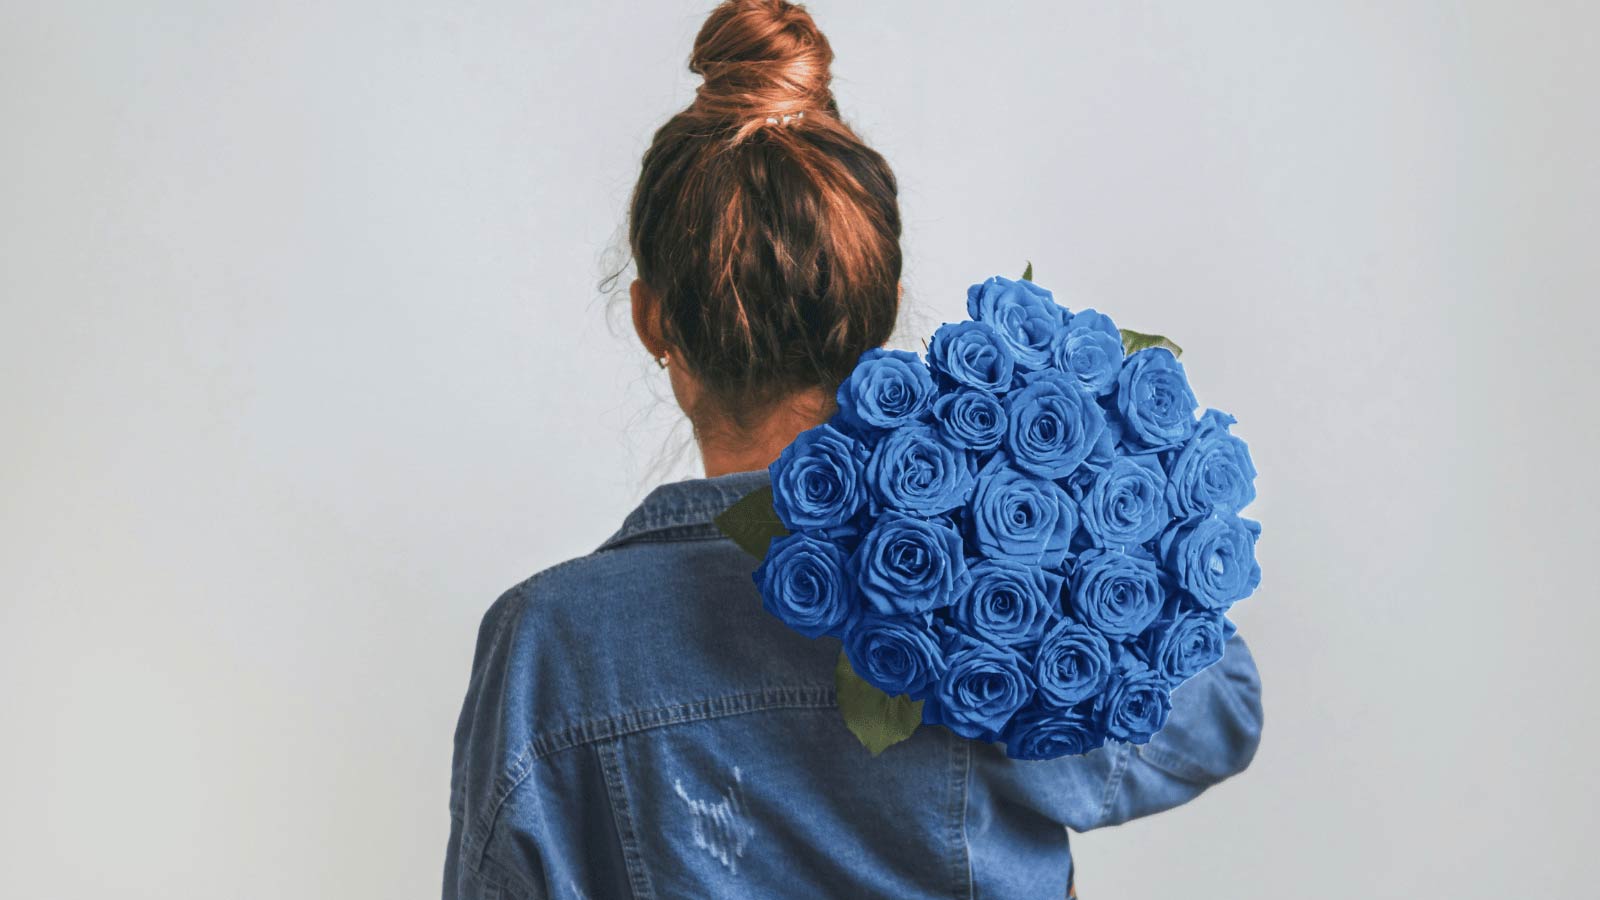 woman with blue roses wondering what they mean